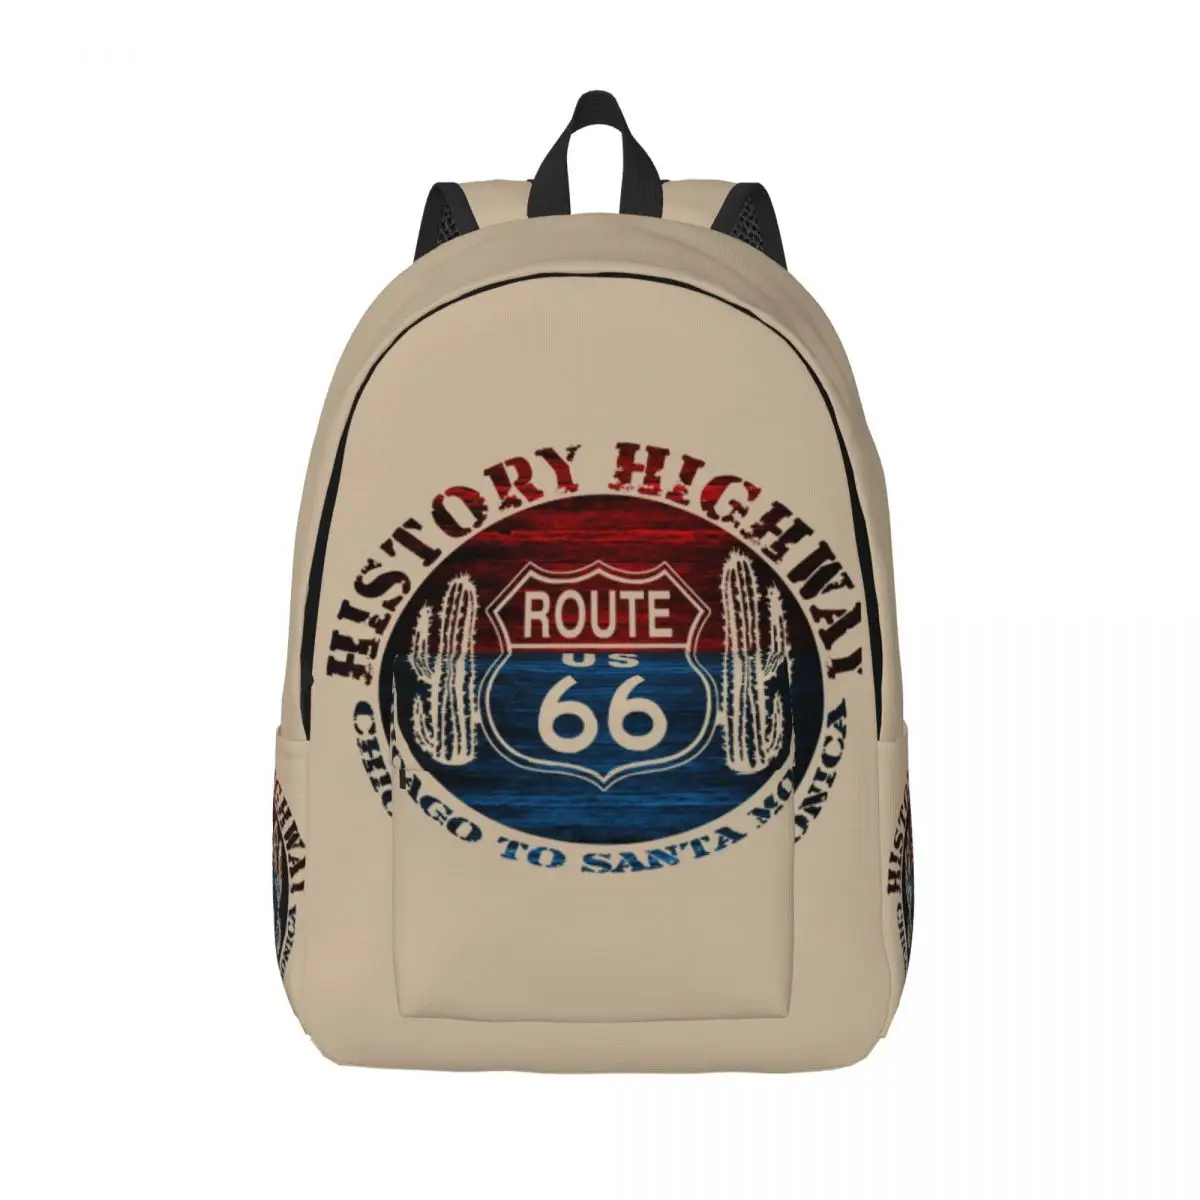 

Route 66 The Great America Road Vintage Trip Perfect Canvas Backpacks Main Street of America College School Travel Bags Bookbag